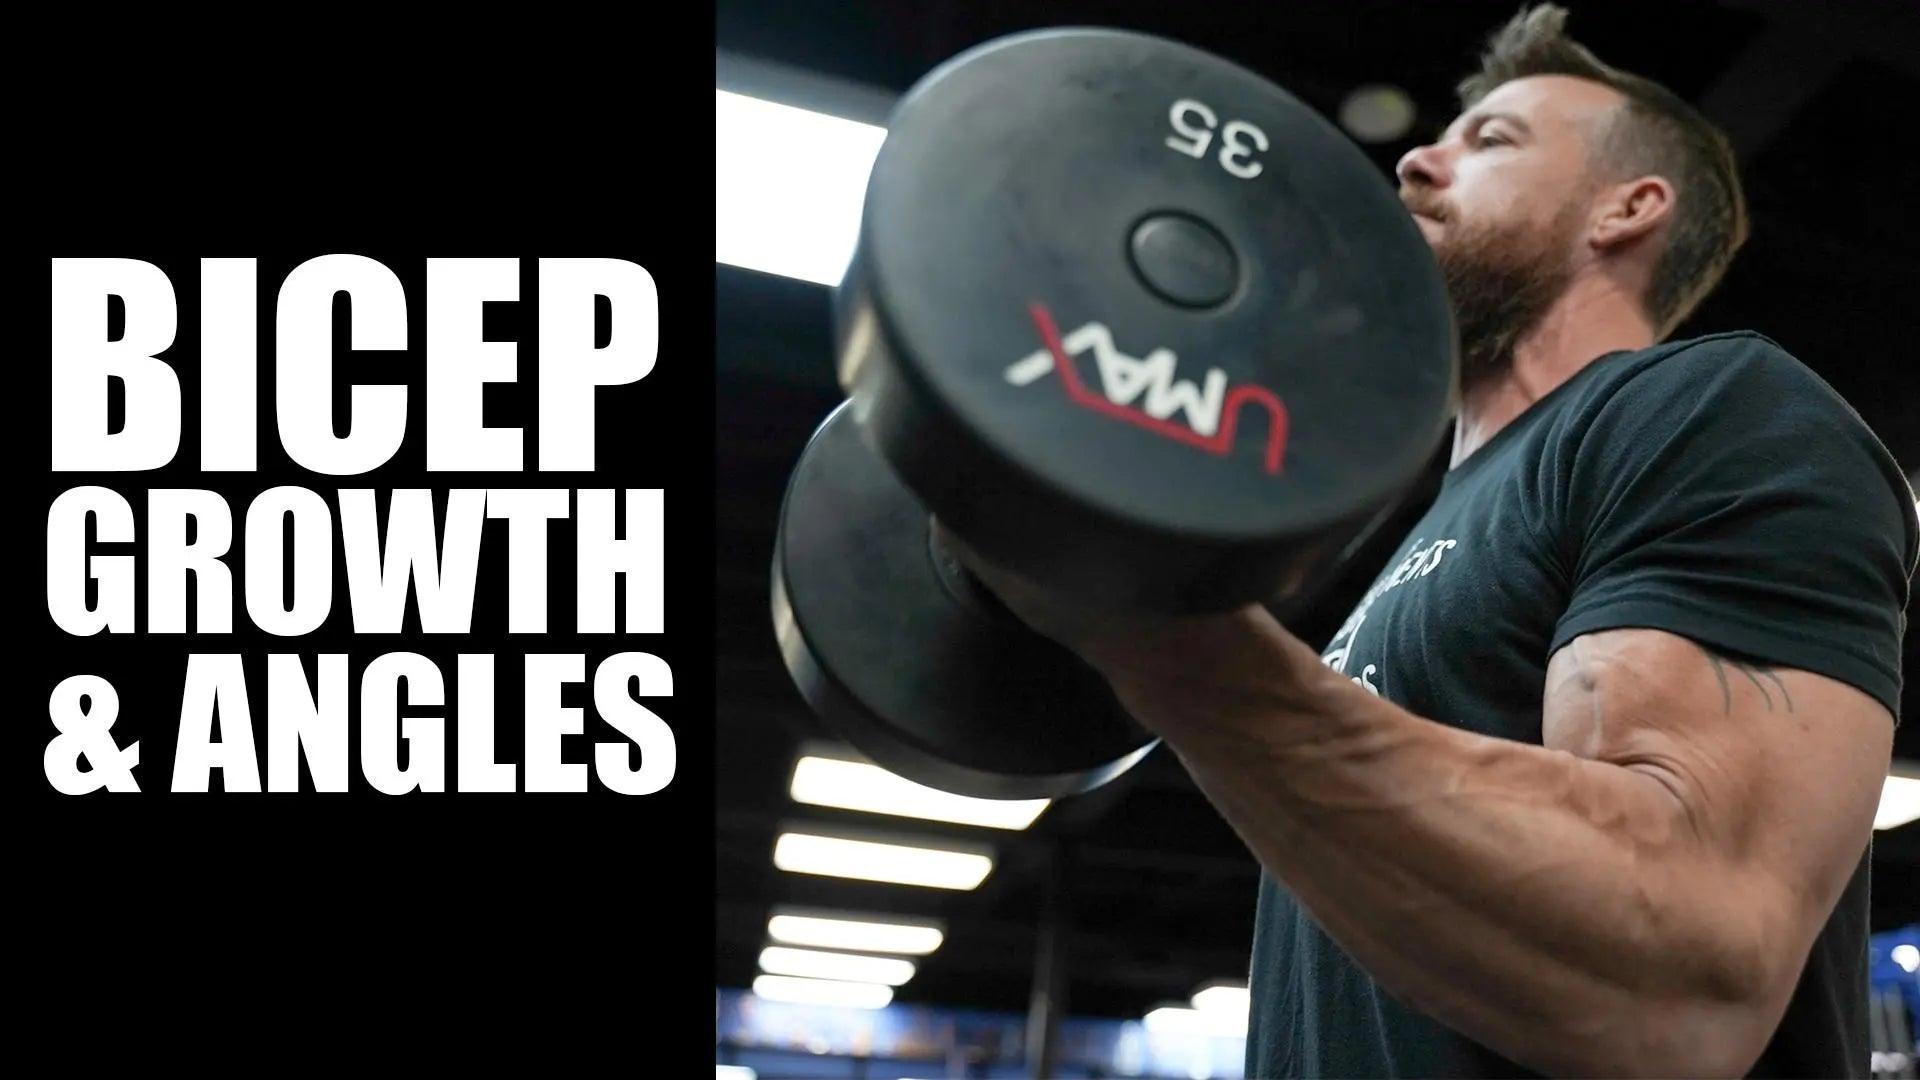 Bicep-Growth-and-Angles UXO Supplements